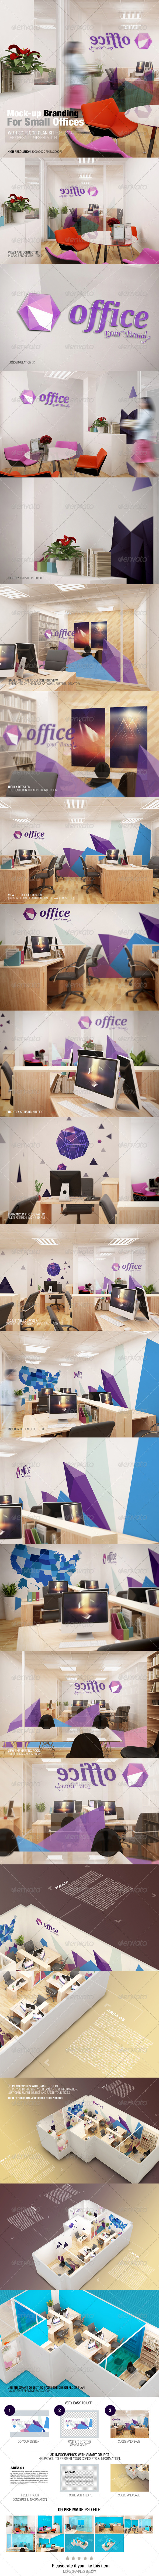 Mockup-Branding-For-Small-Offices-Preview.jpg